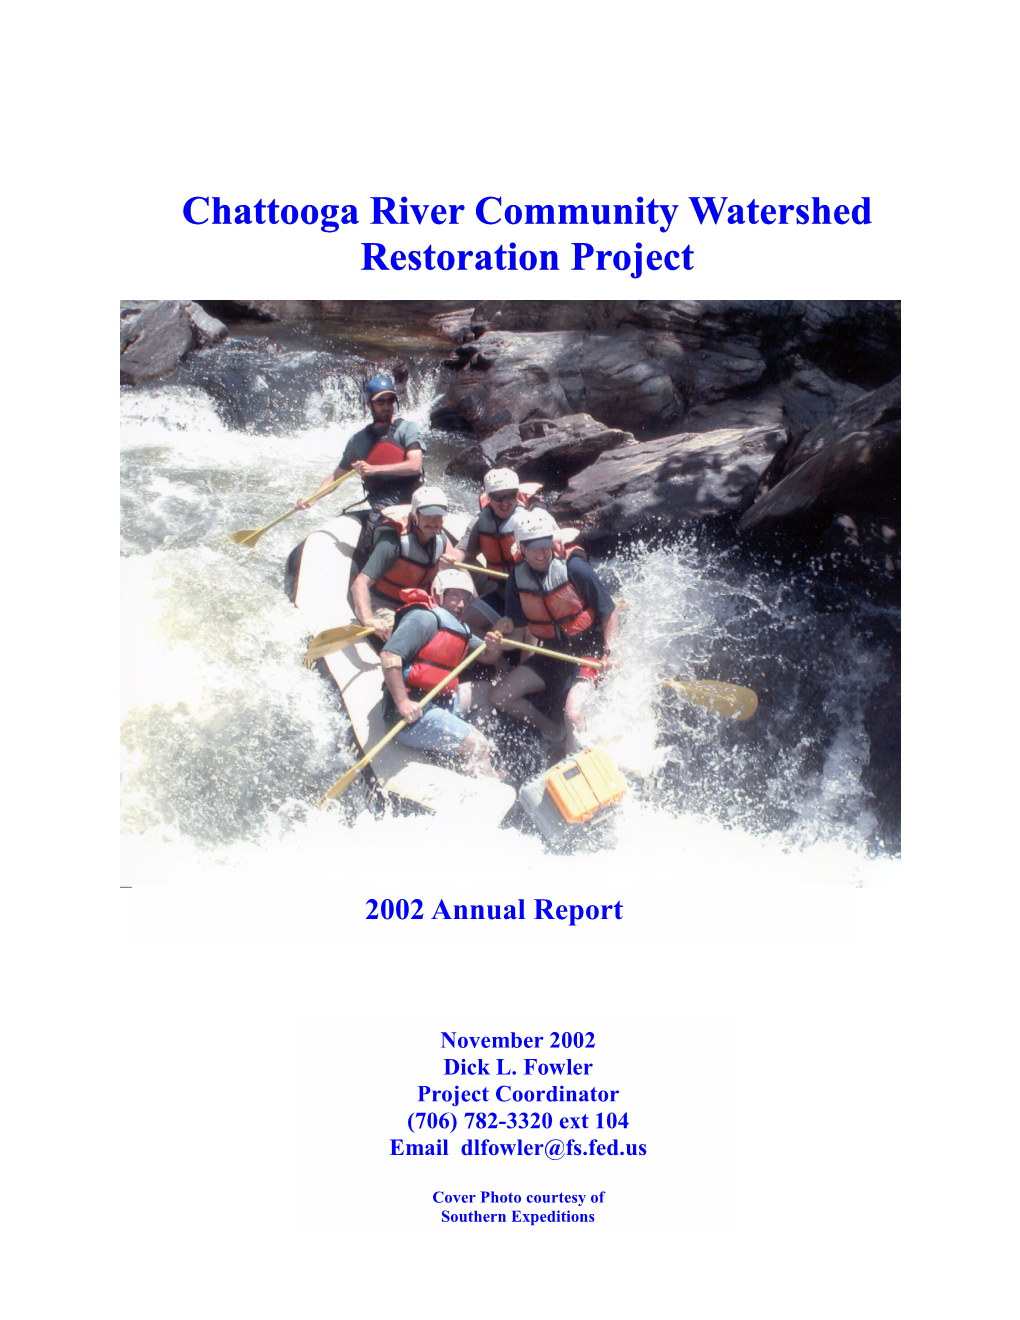 2002 Chattooga River Watershed Restoration Project Report